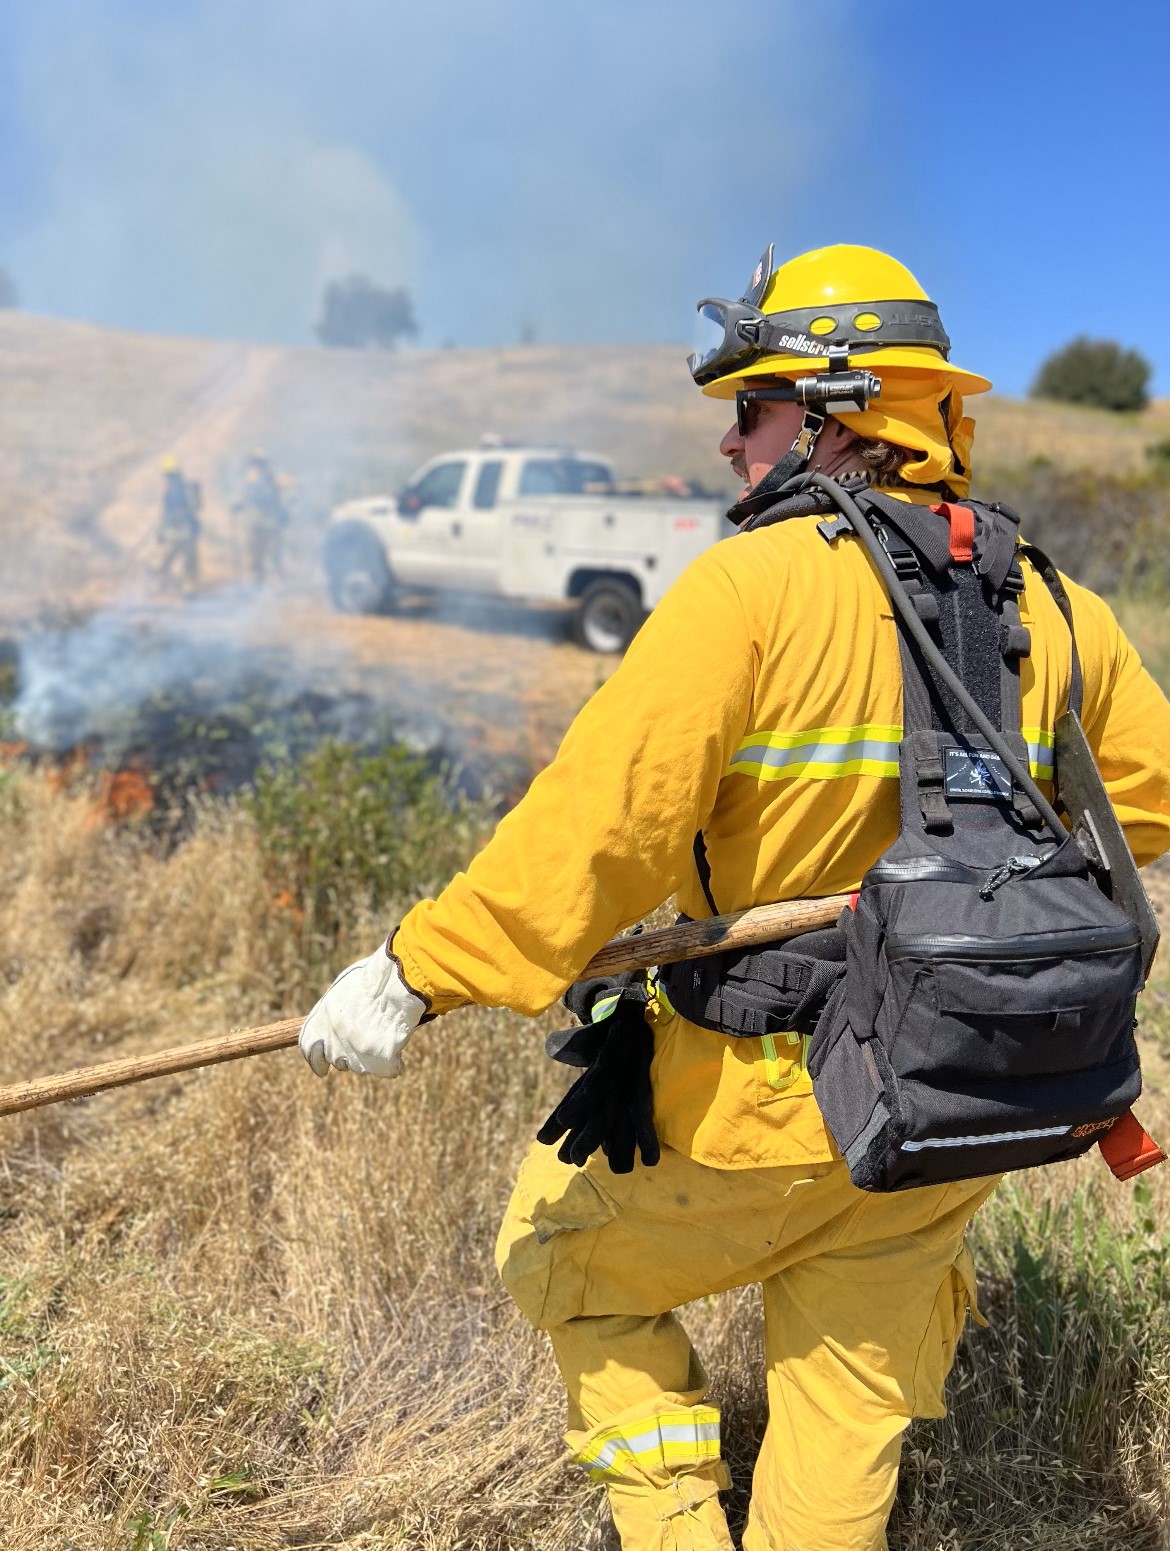 A firefighter works a controlled burn in a grassy field